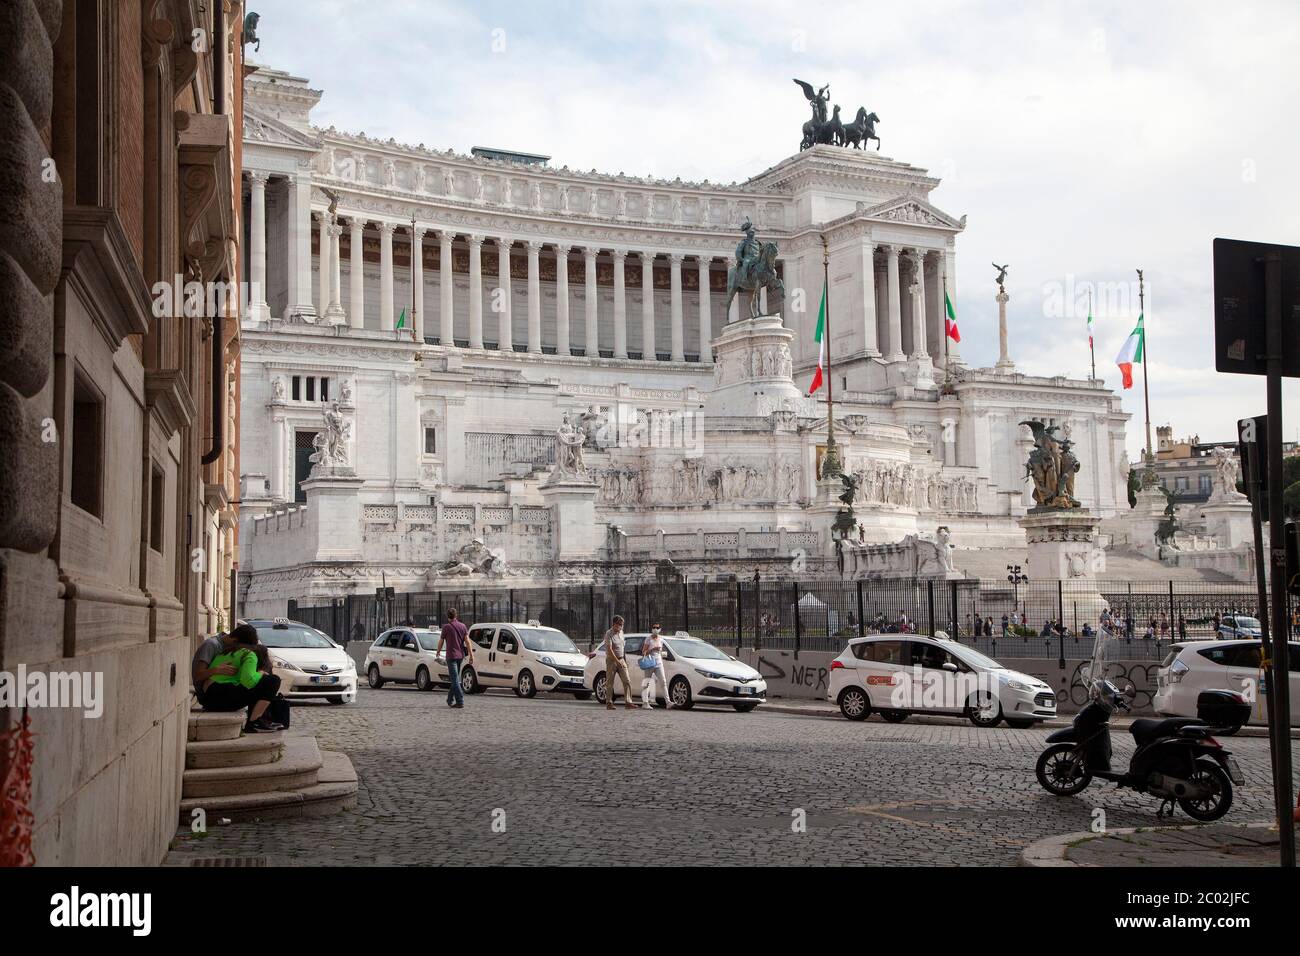 A queue of taxis wait for customers at the Imperial Forums (Fori Imperiali) near Piazza Venezia on June 02, 2020 in Rome, Italy as Italy starts to ease its lockdown, during the country's lockdown aimed at curbing the spread of the COVID-19 infection, caused by the novel coronavirus Stock Photo